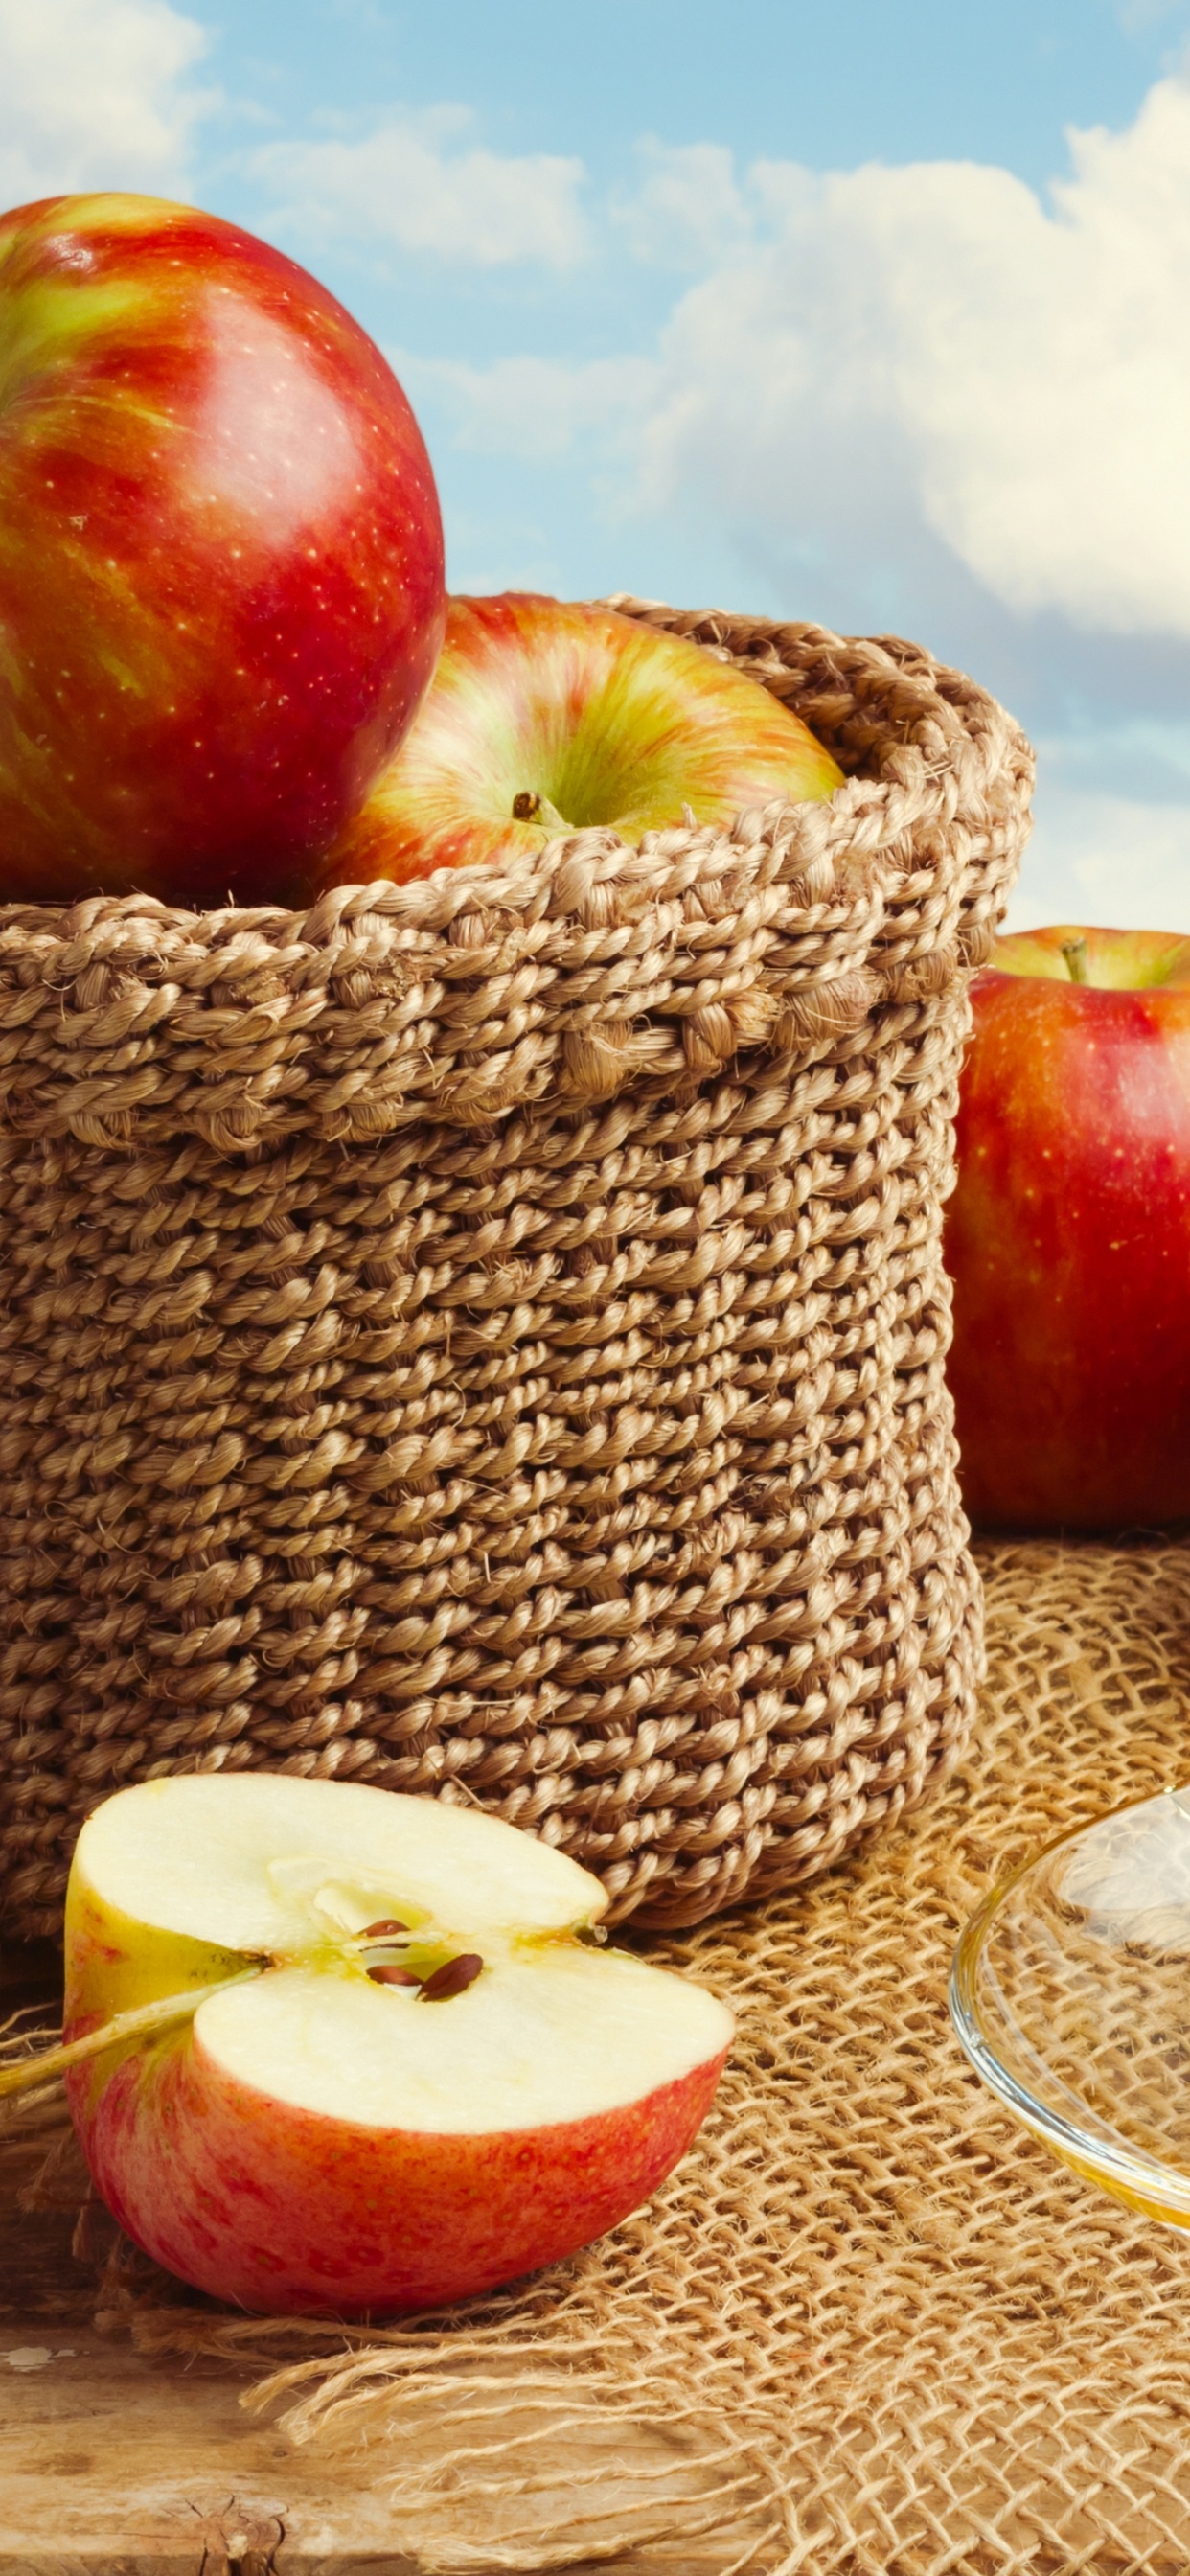 Red Apples on Brown Woven Basket. Wallpaper in 1242x2688 Resolution